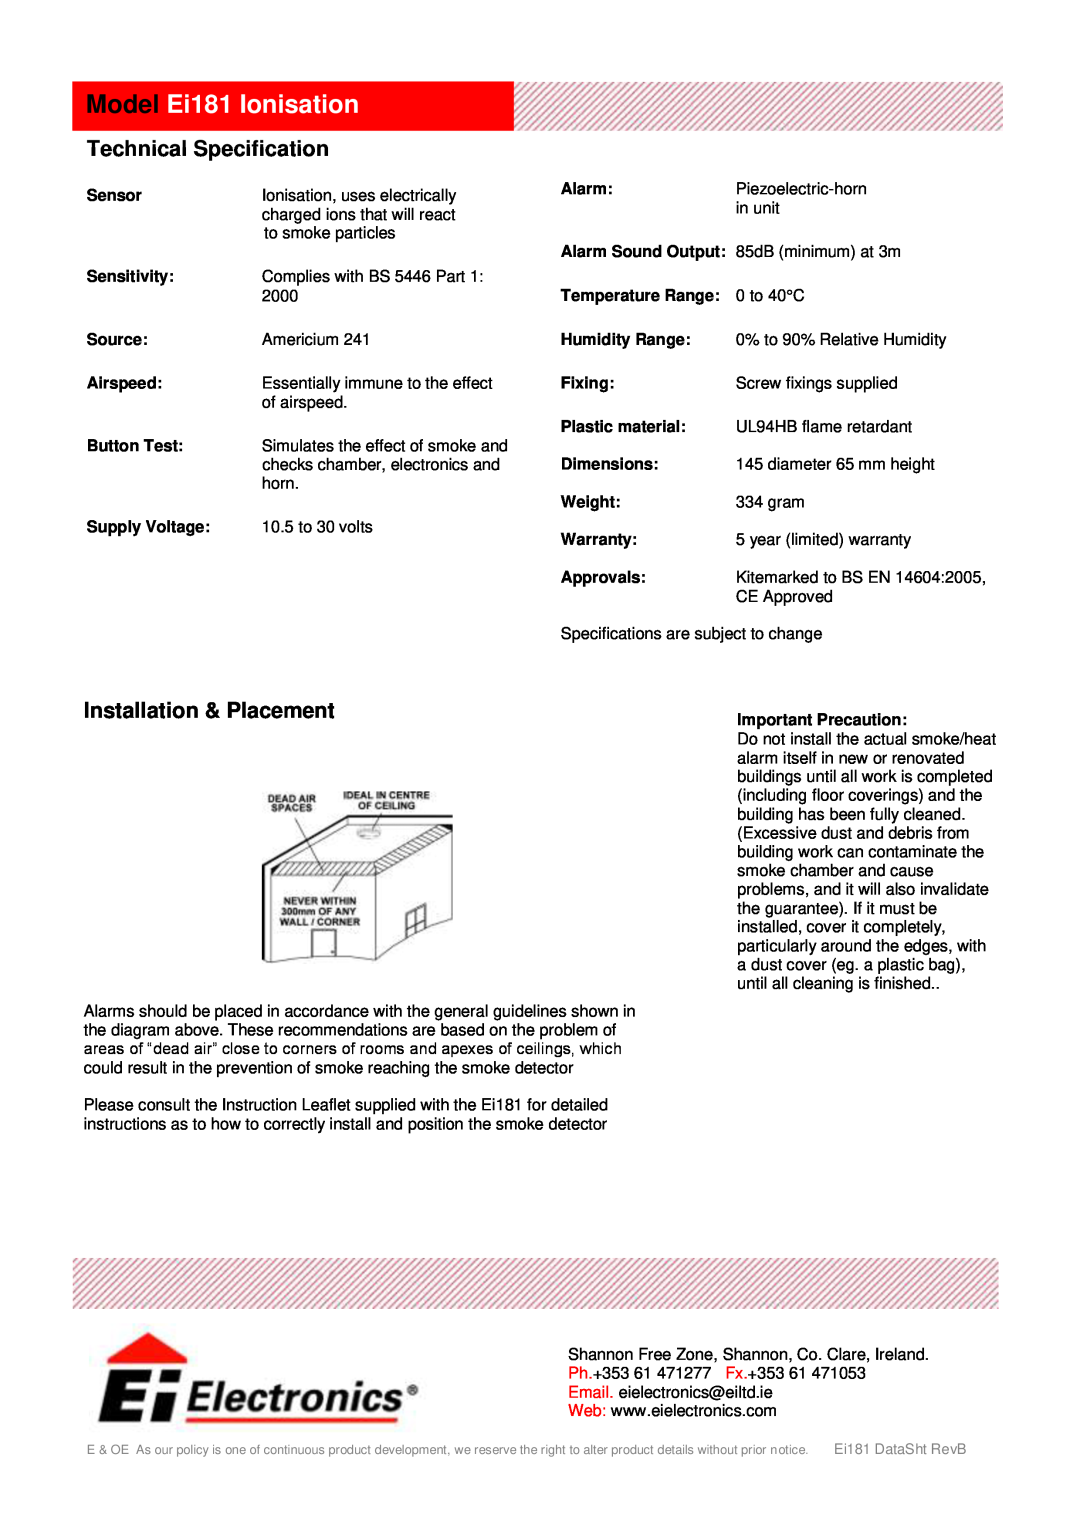 Ei Electronics Model Ei181 Ionisation, Technical Specification, Installation & Placement, Source, Supply Voltage, Alarm 